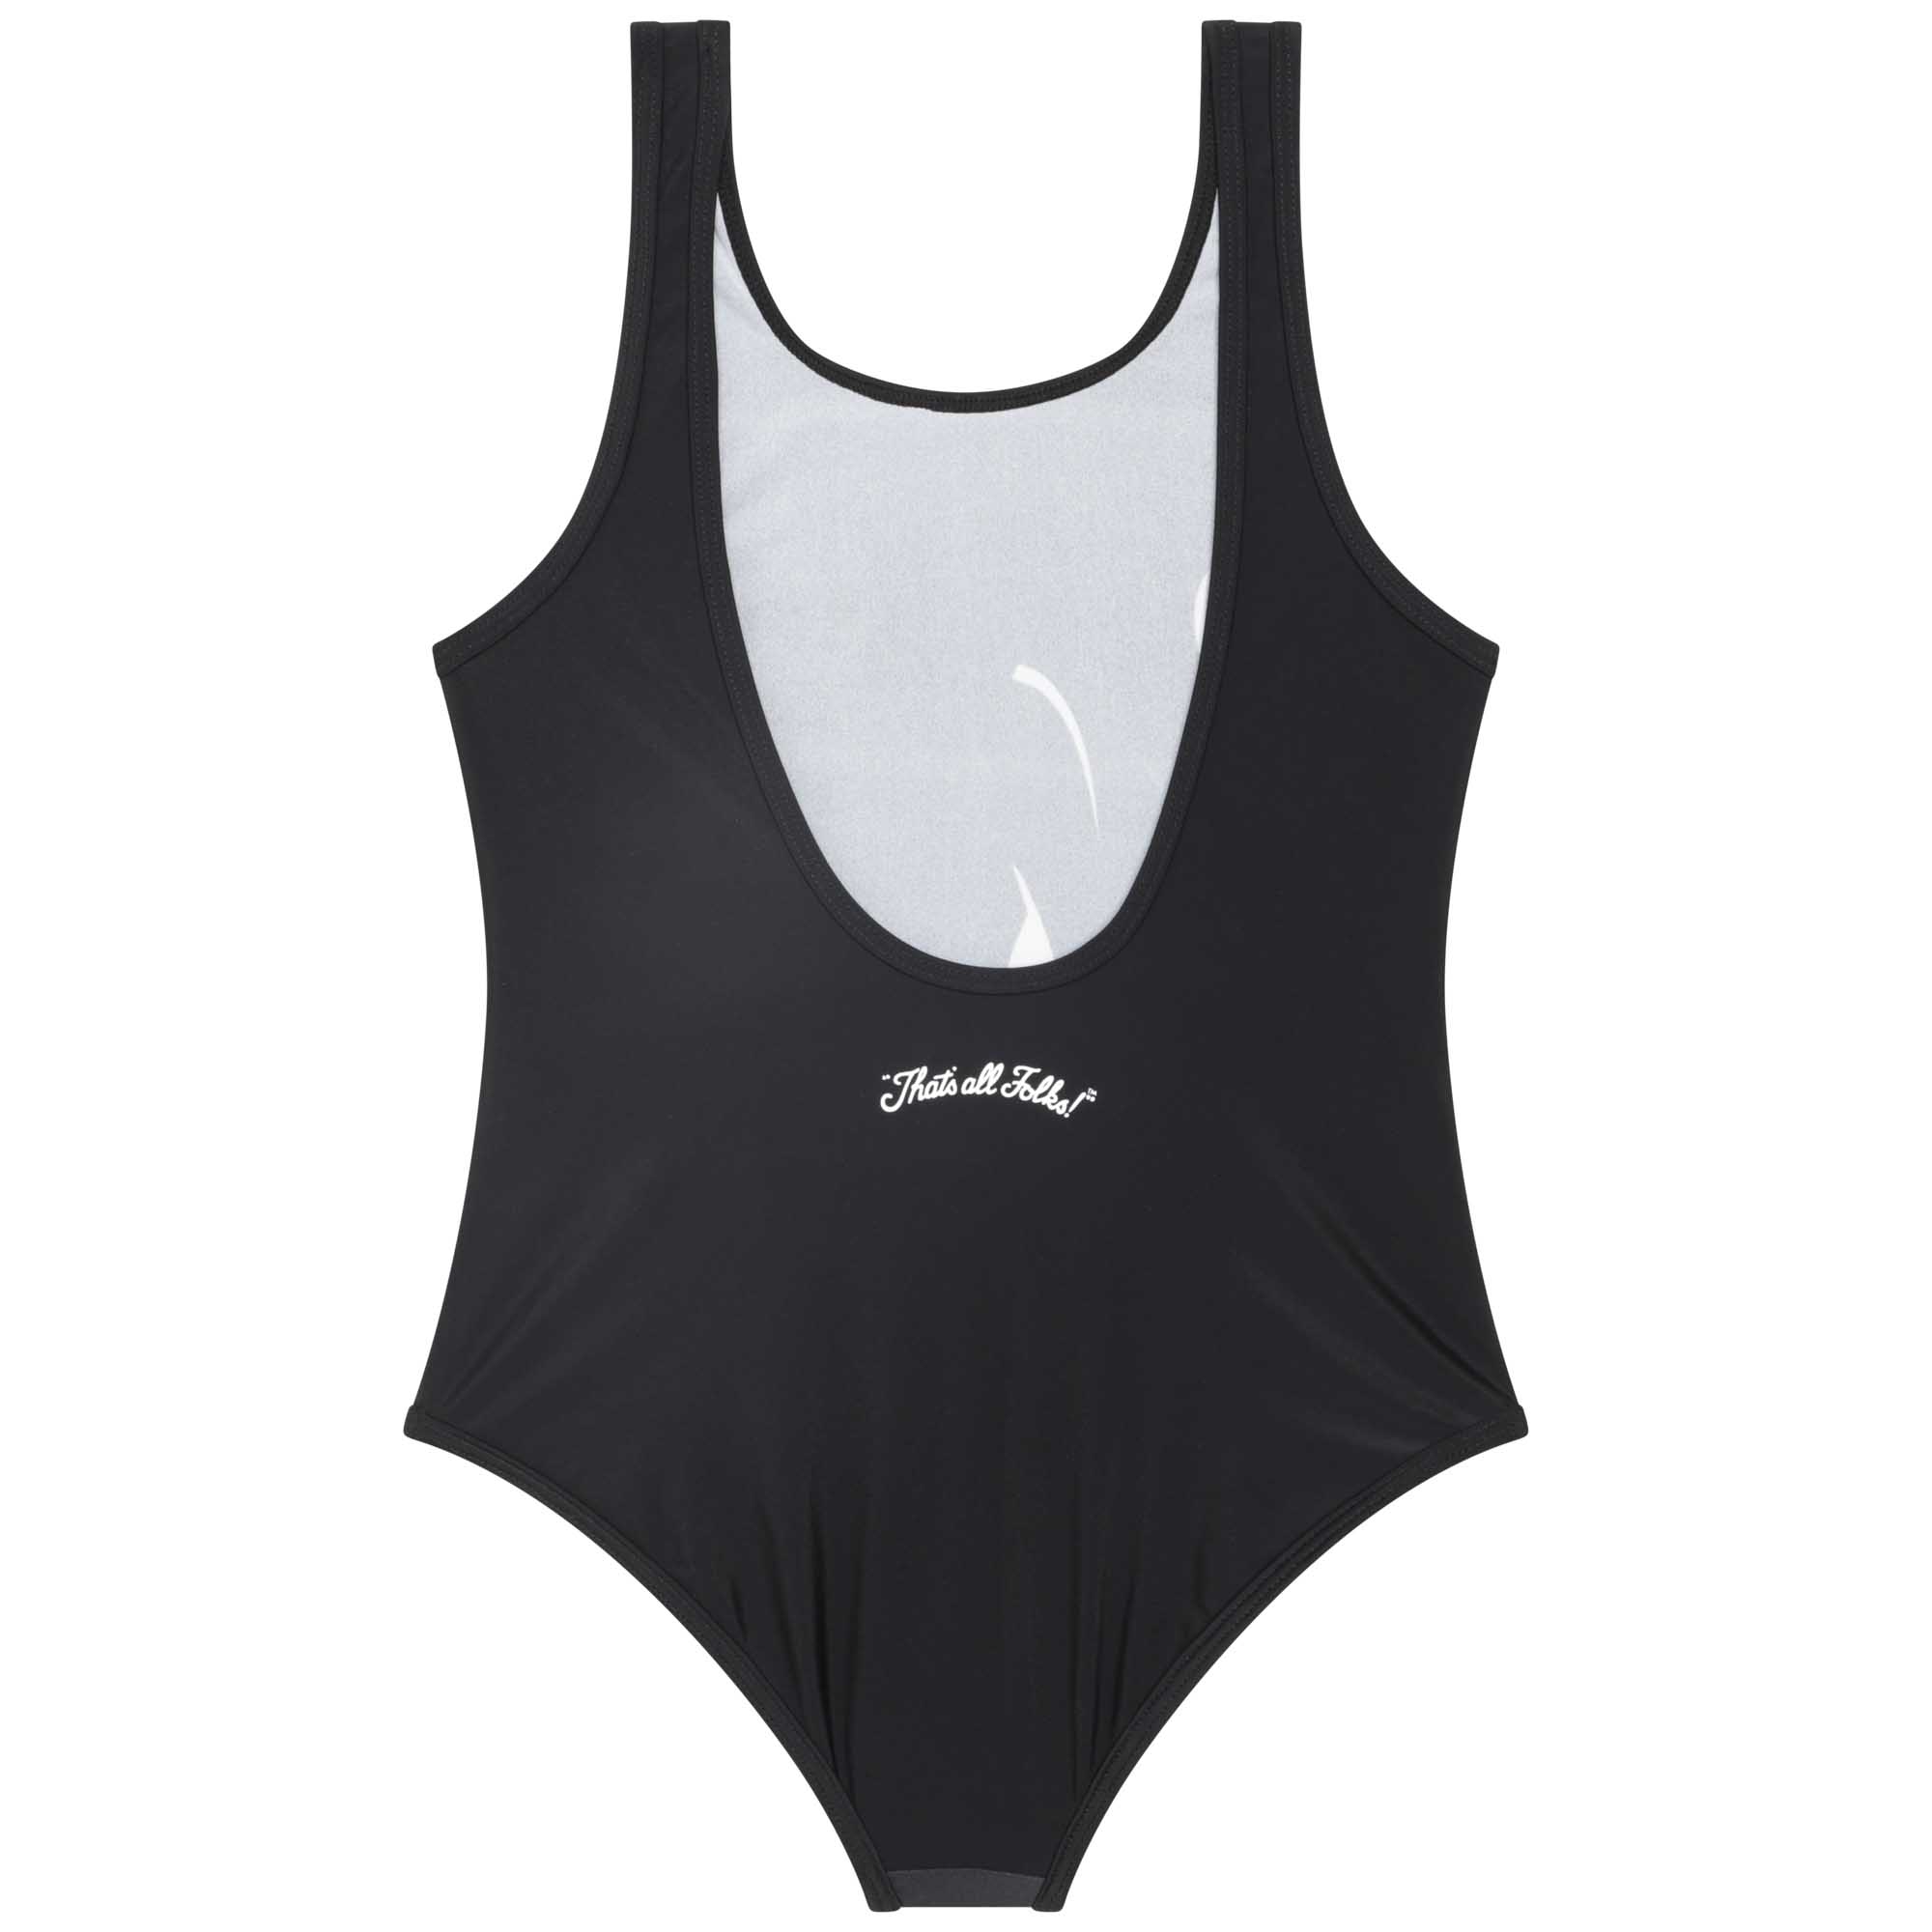 One-piece swimming costume DKNY for GIRL